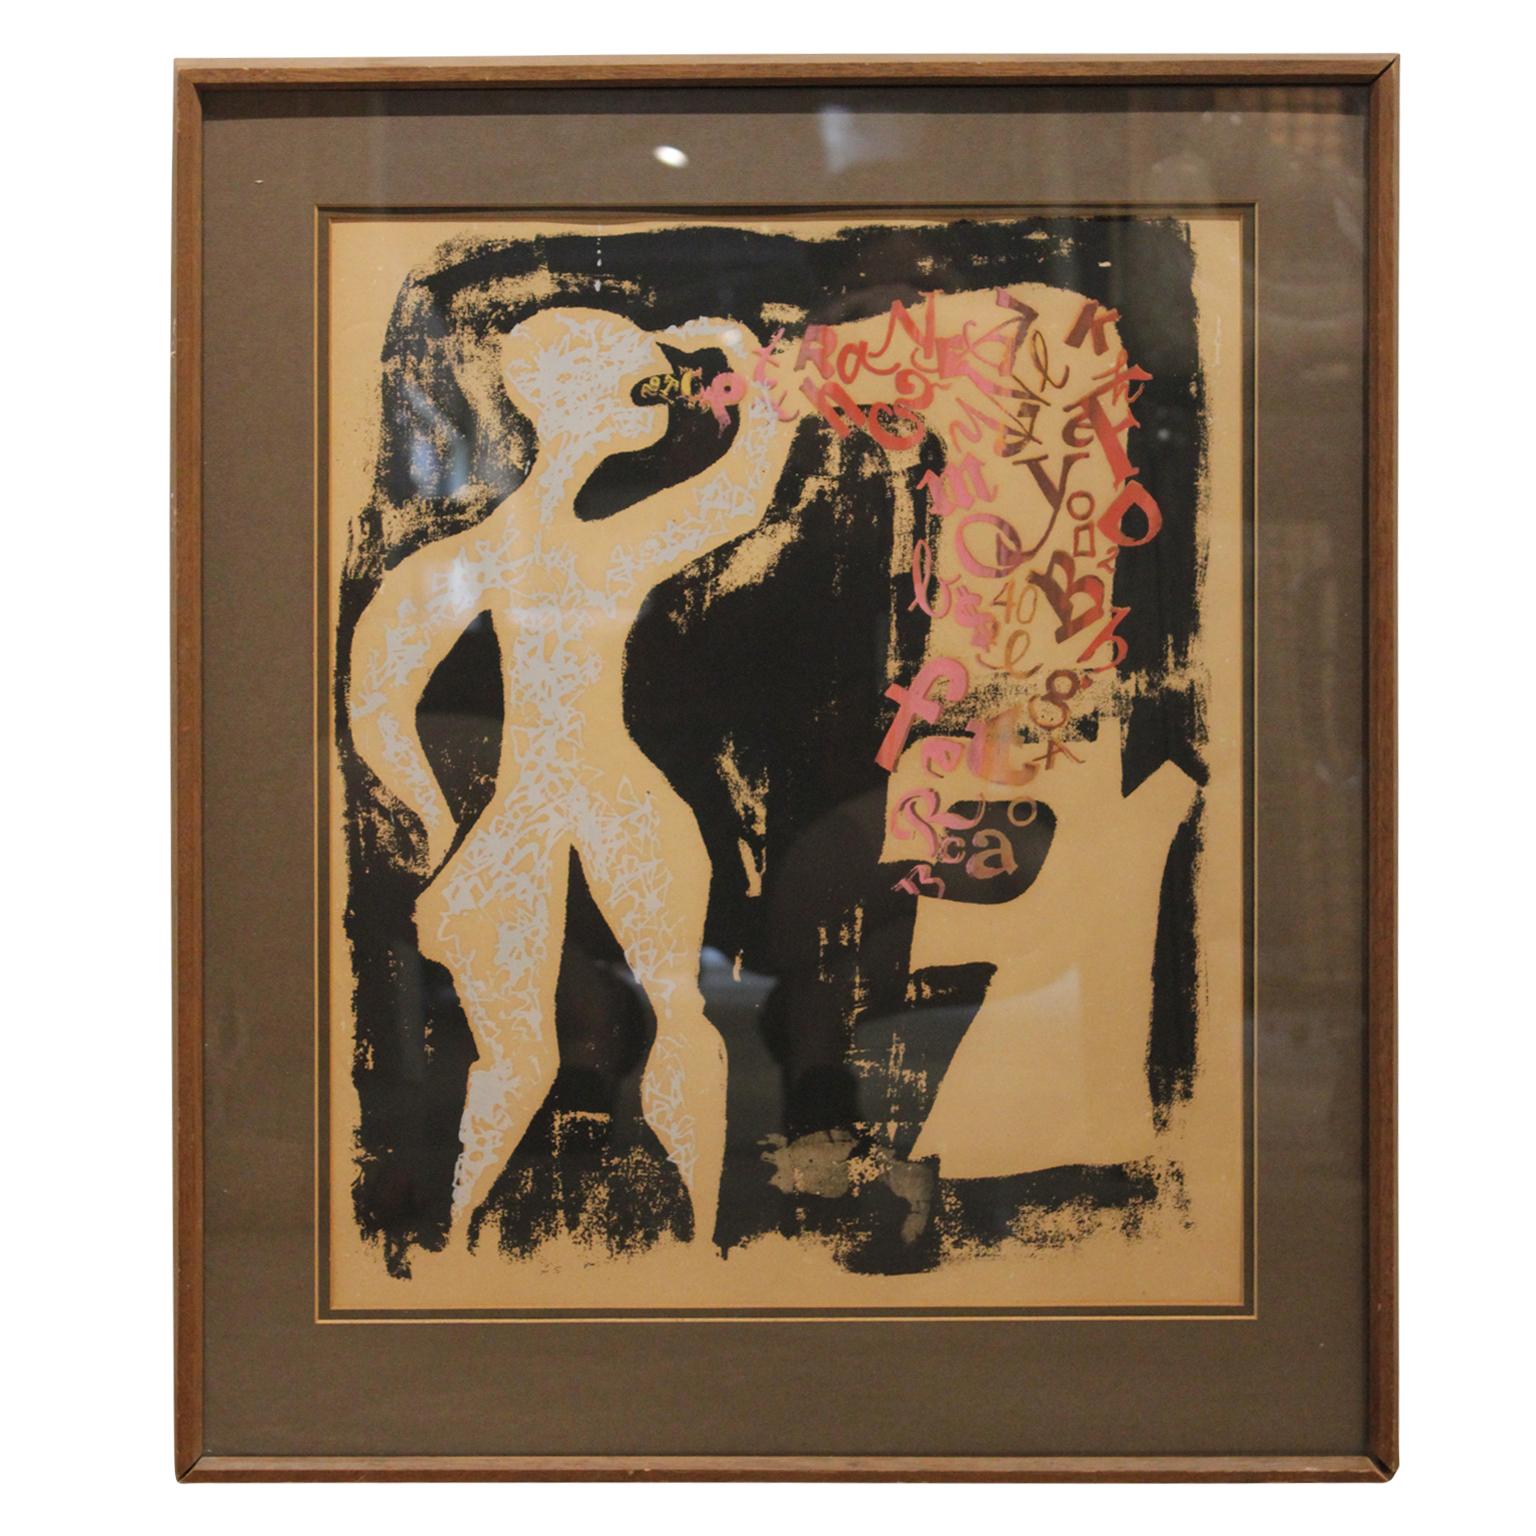 Unknown Abstract Print - Medium Sized Abstract Figurative of a Man Speaking Gibberish